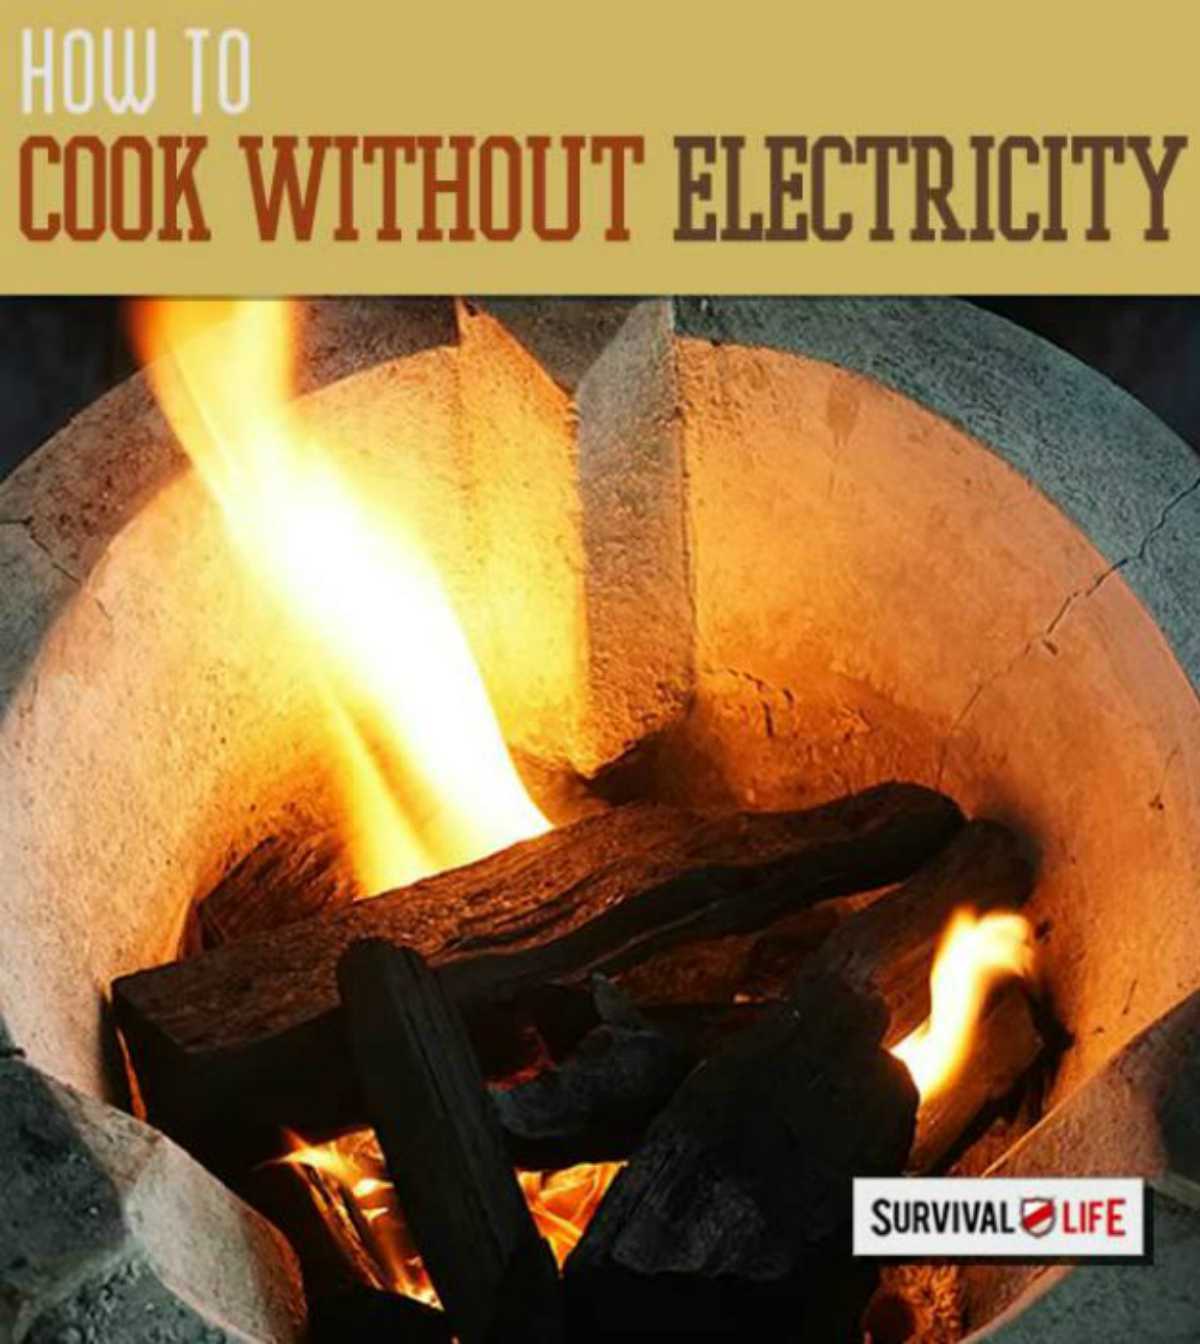 Cooking without electricity | Obscure Bushcraft Skills For Survival